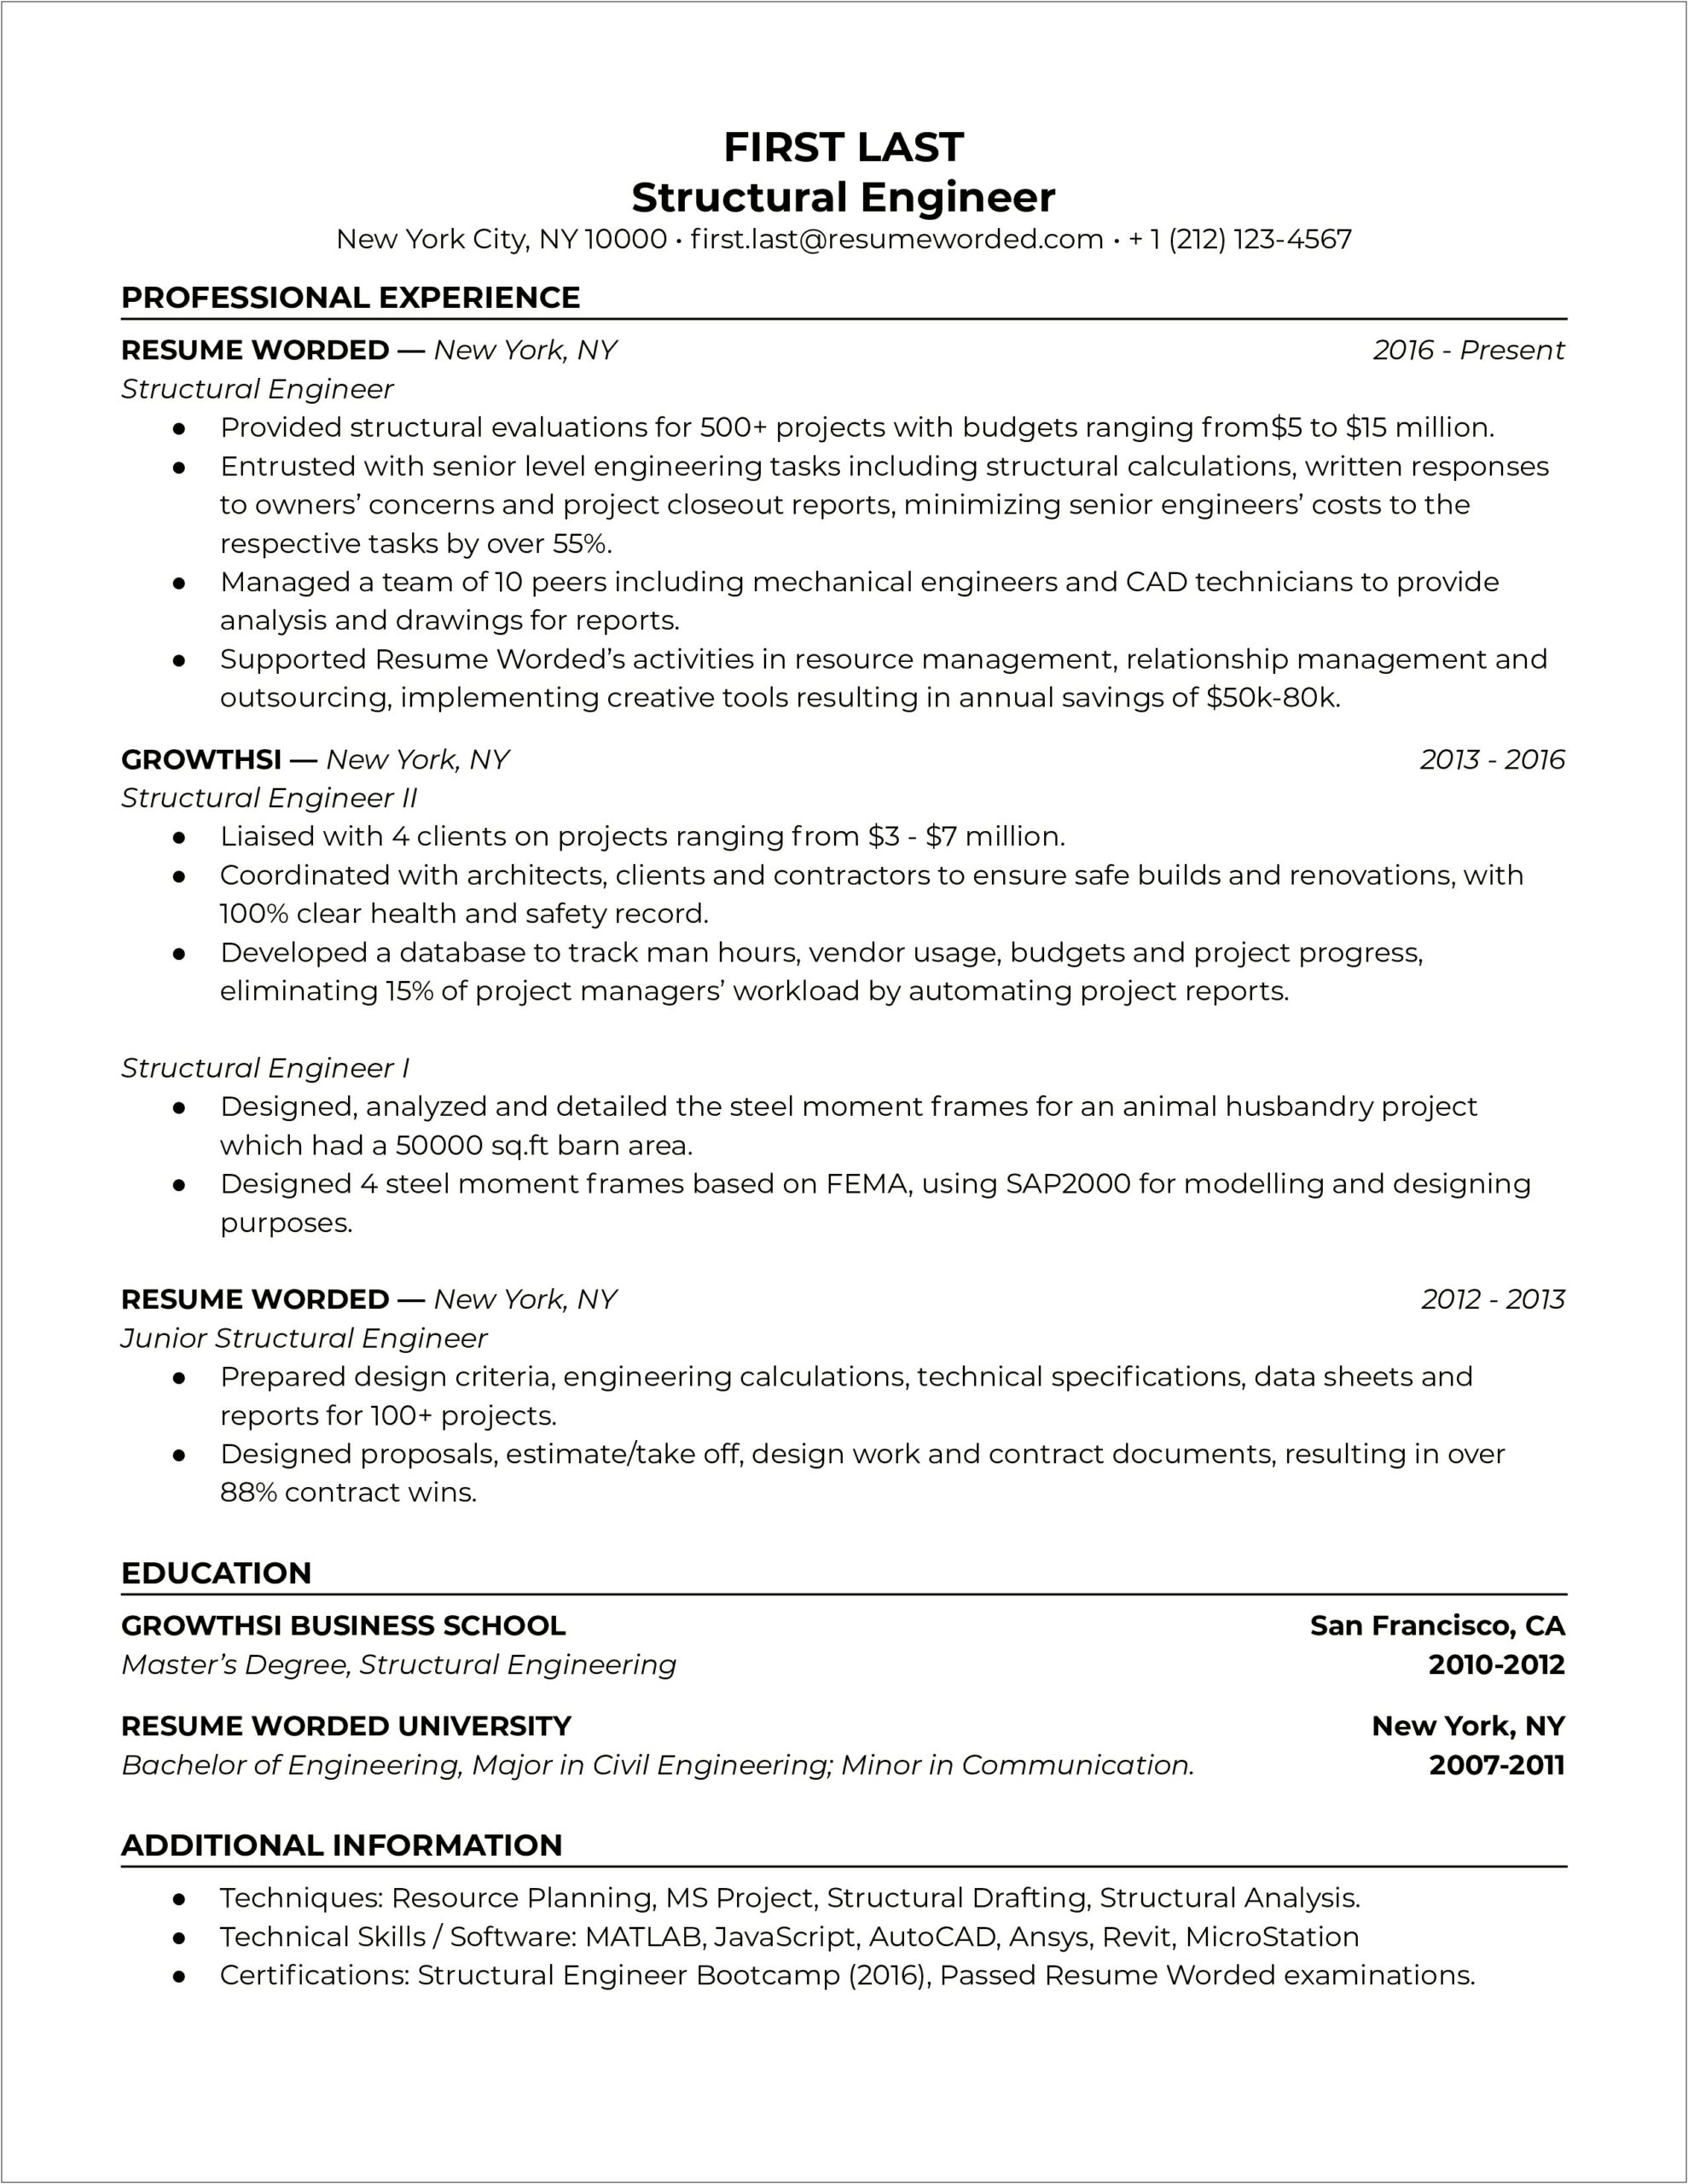 Monster Civil Engineering Resume With One Year Experience